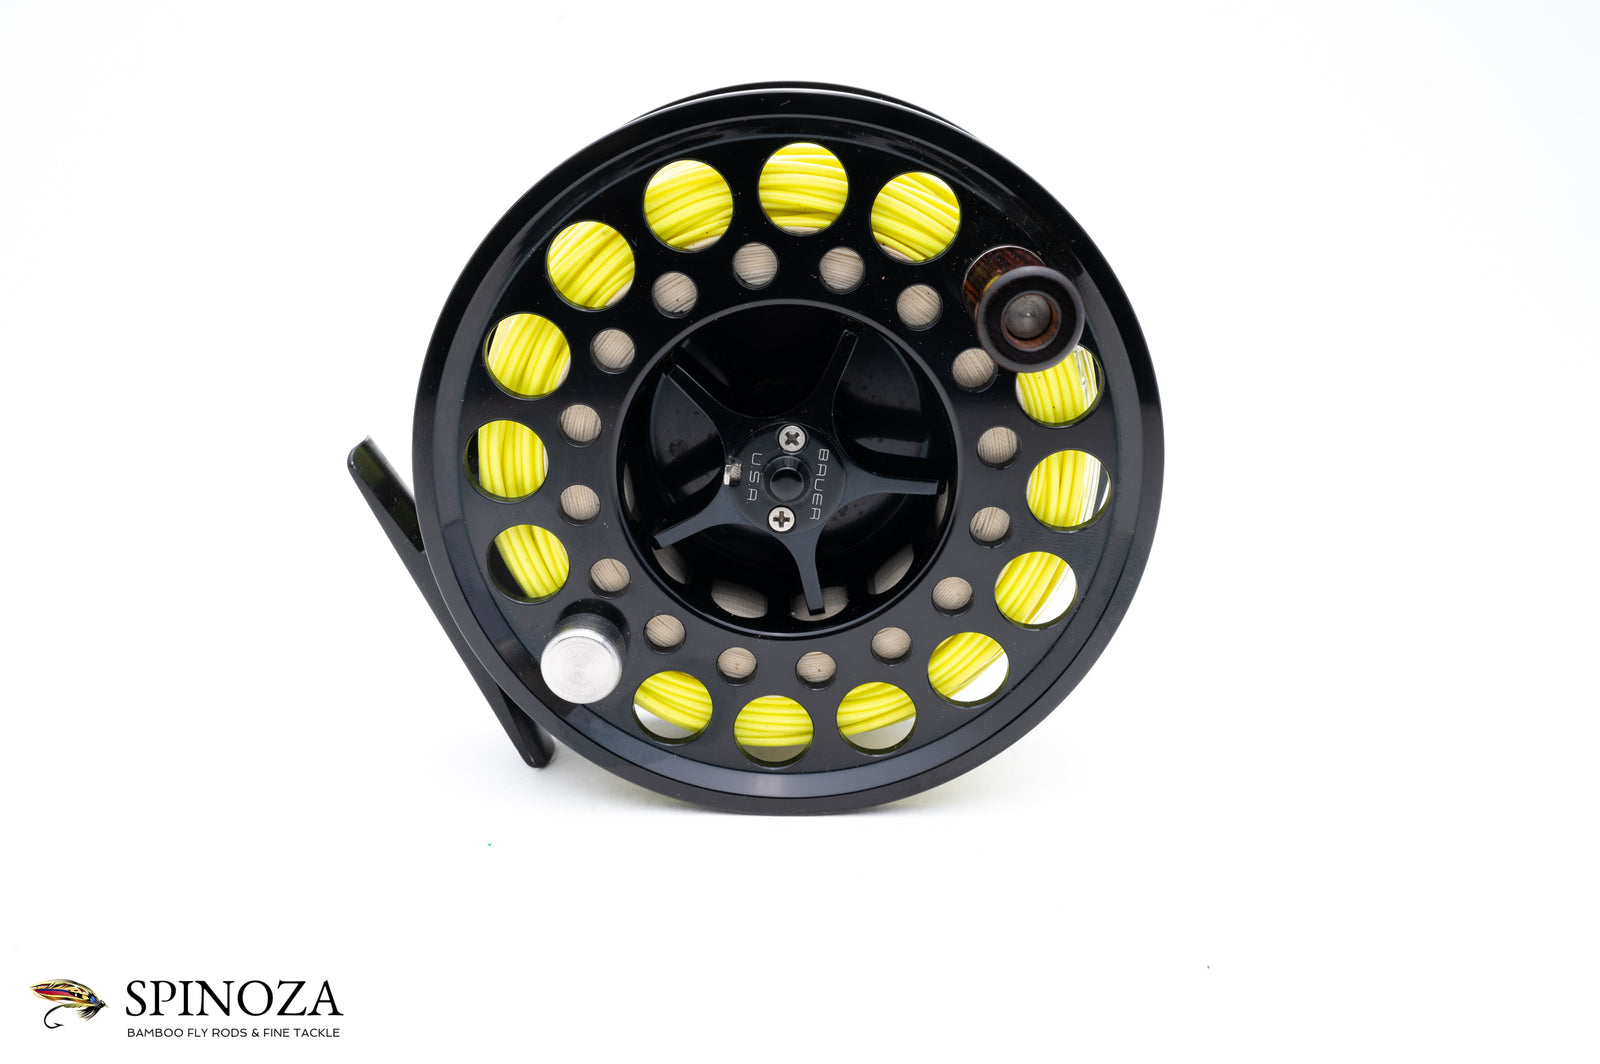 The Bauer Difference - Bauer Premium Fly Reels